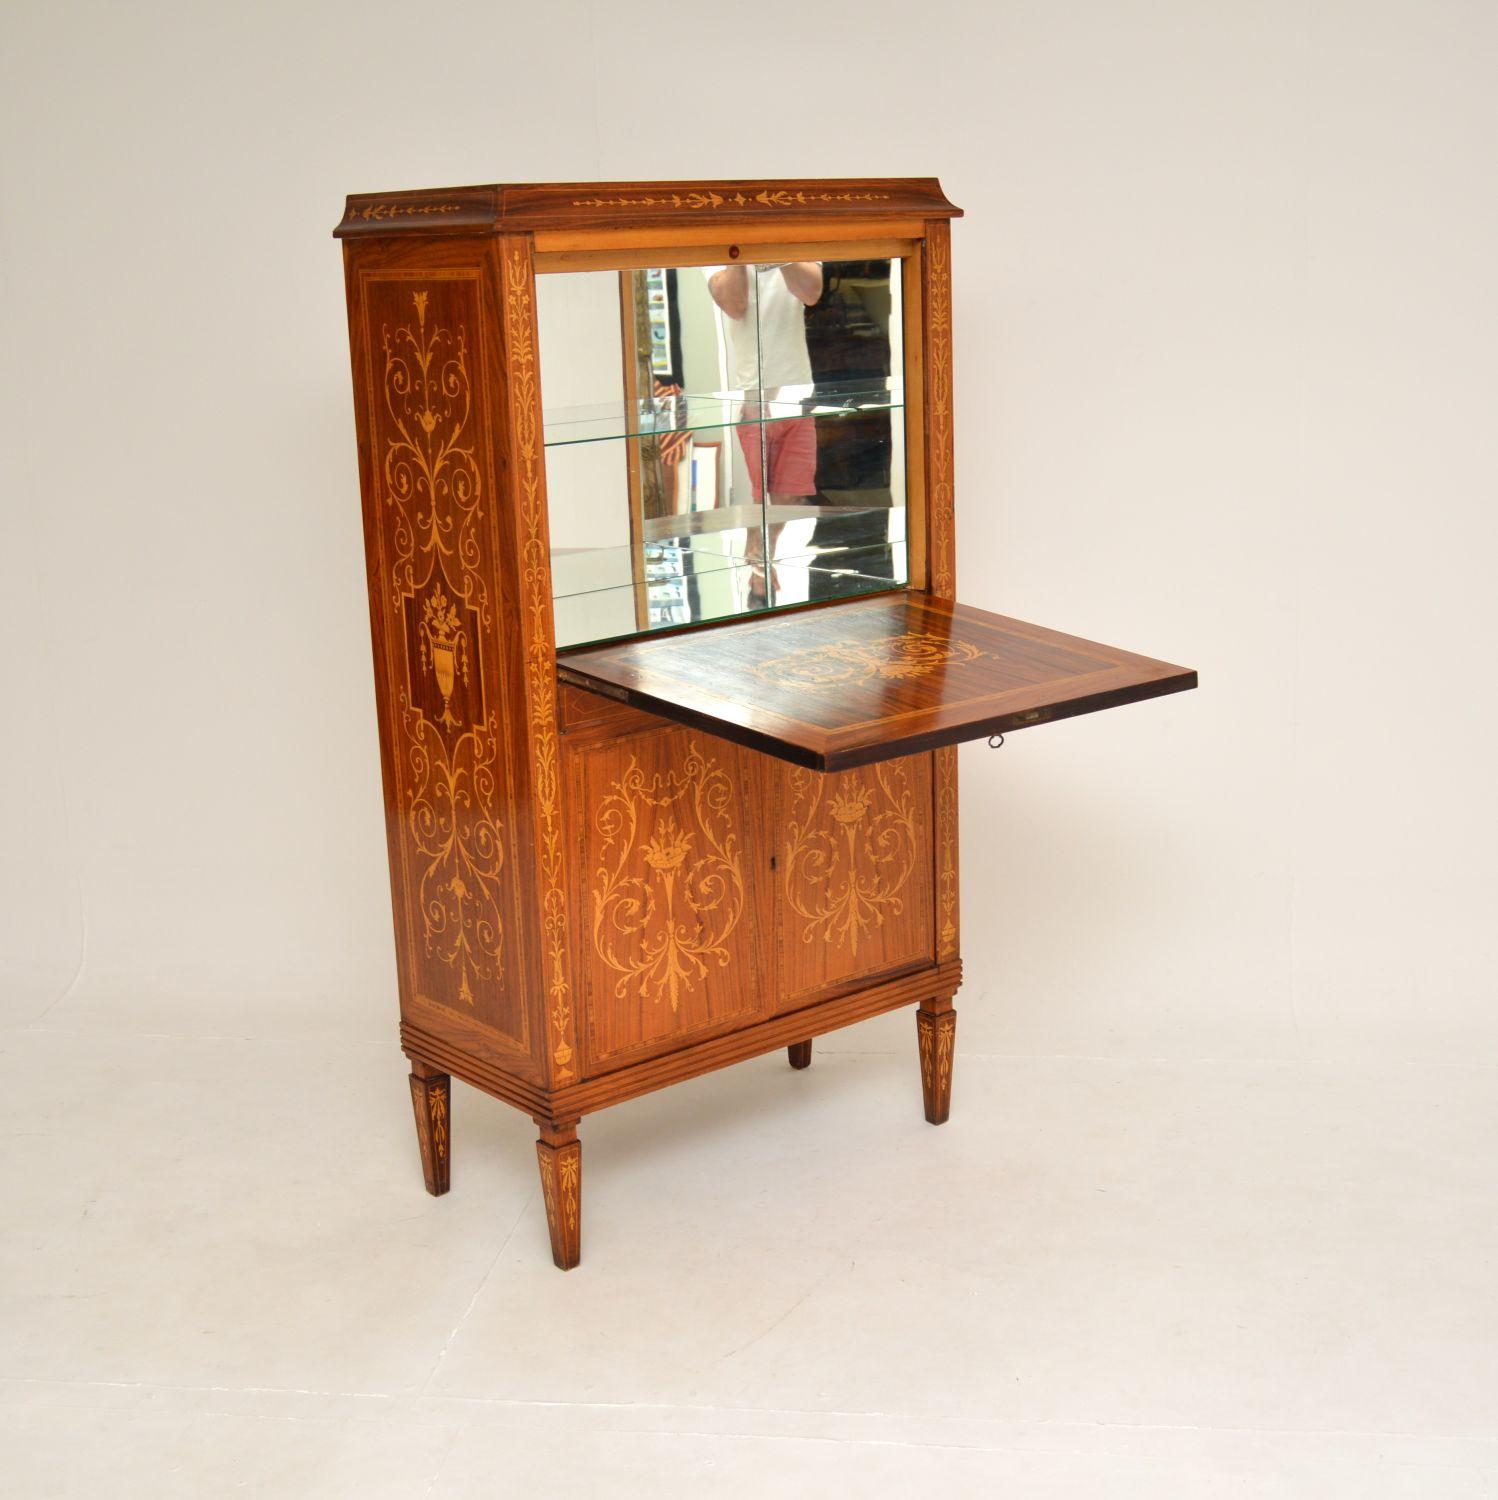 Early 20th Century Antique Italian Inlaid Drinks Cabinet